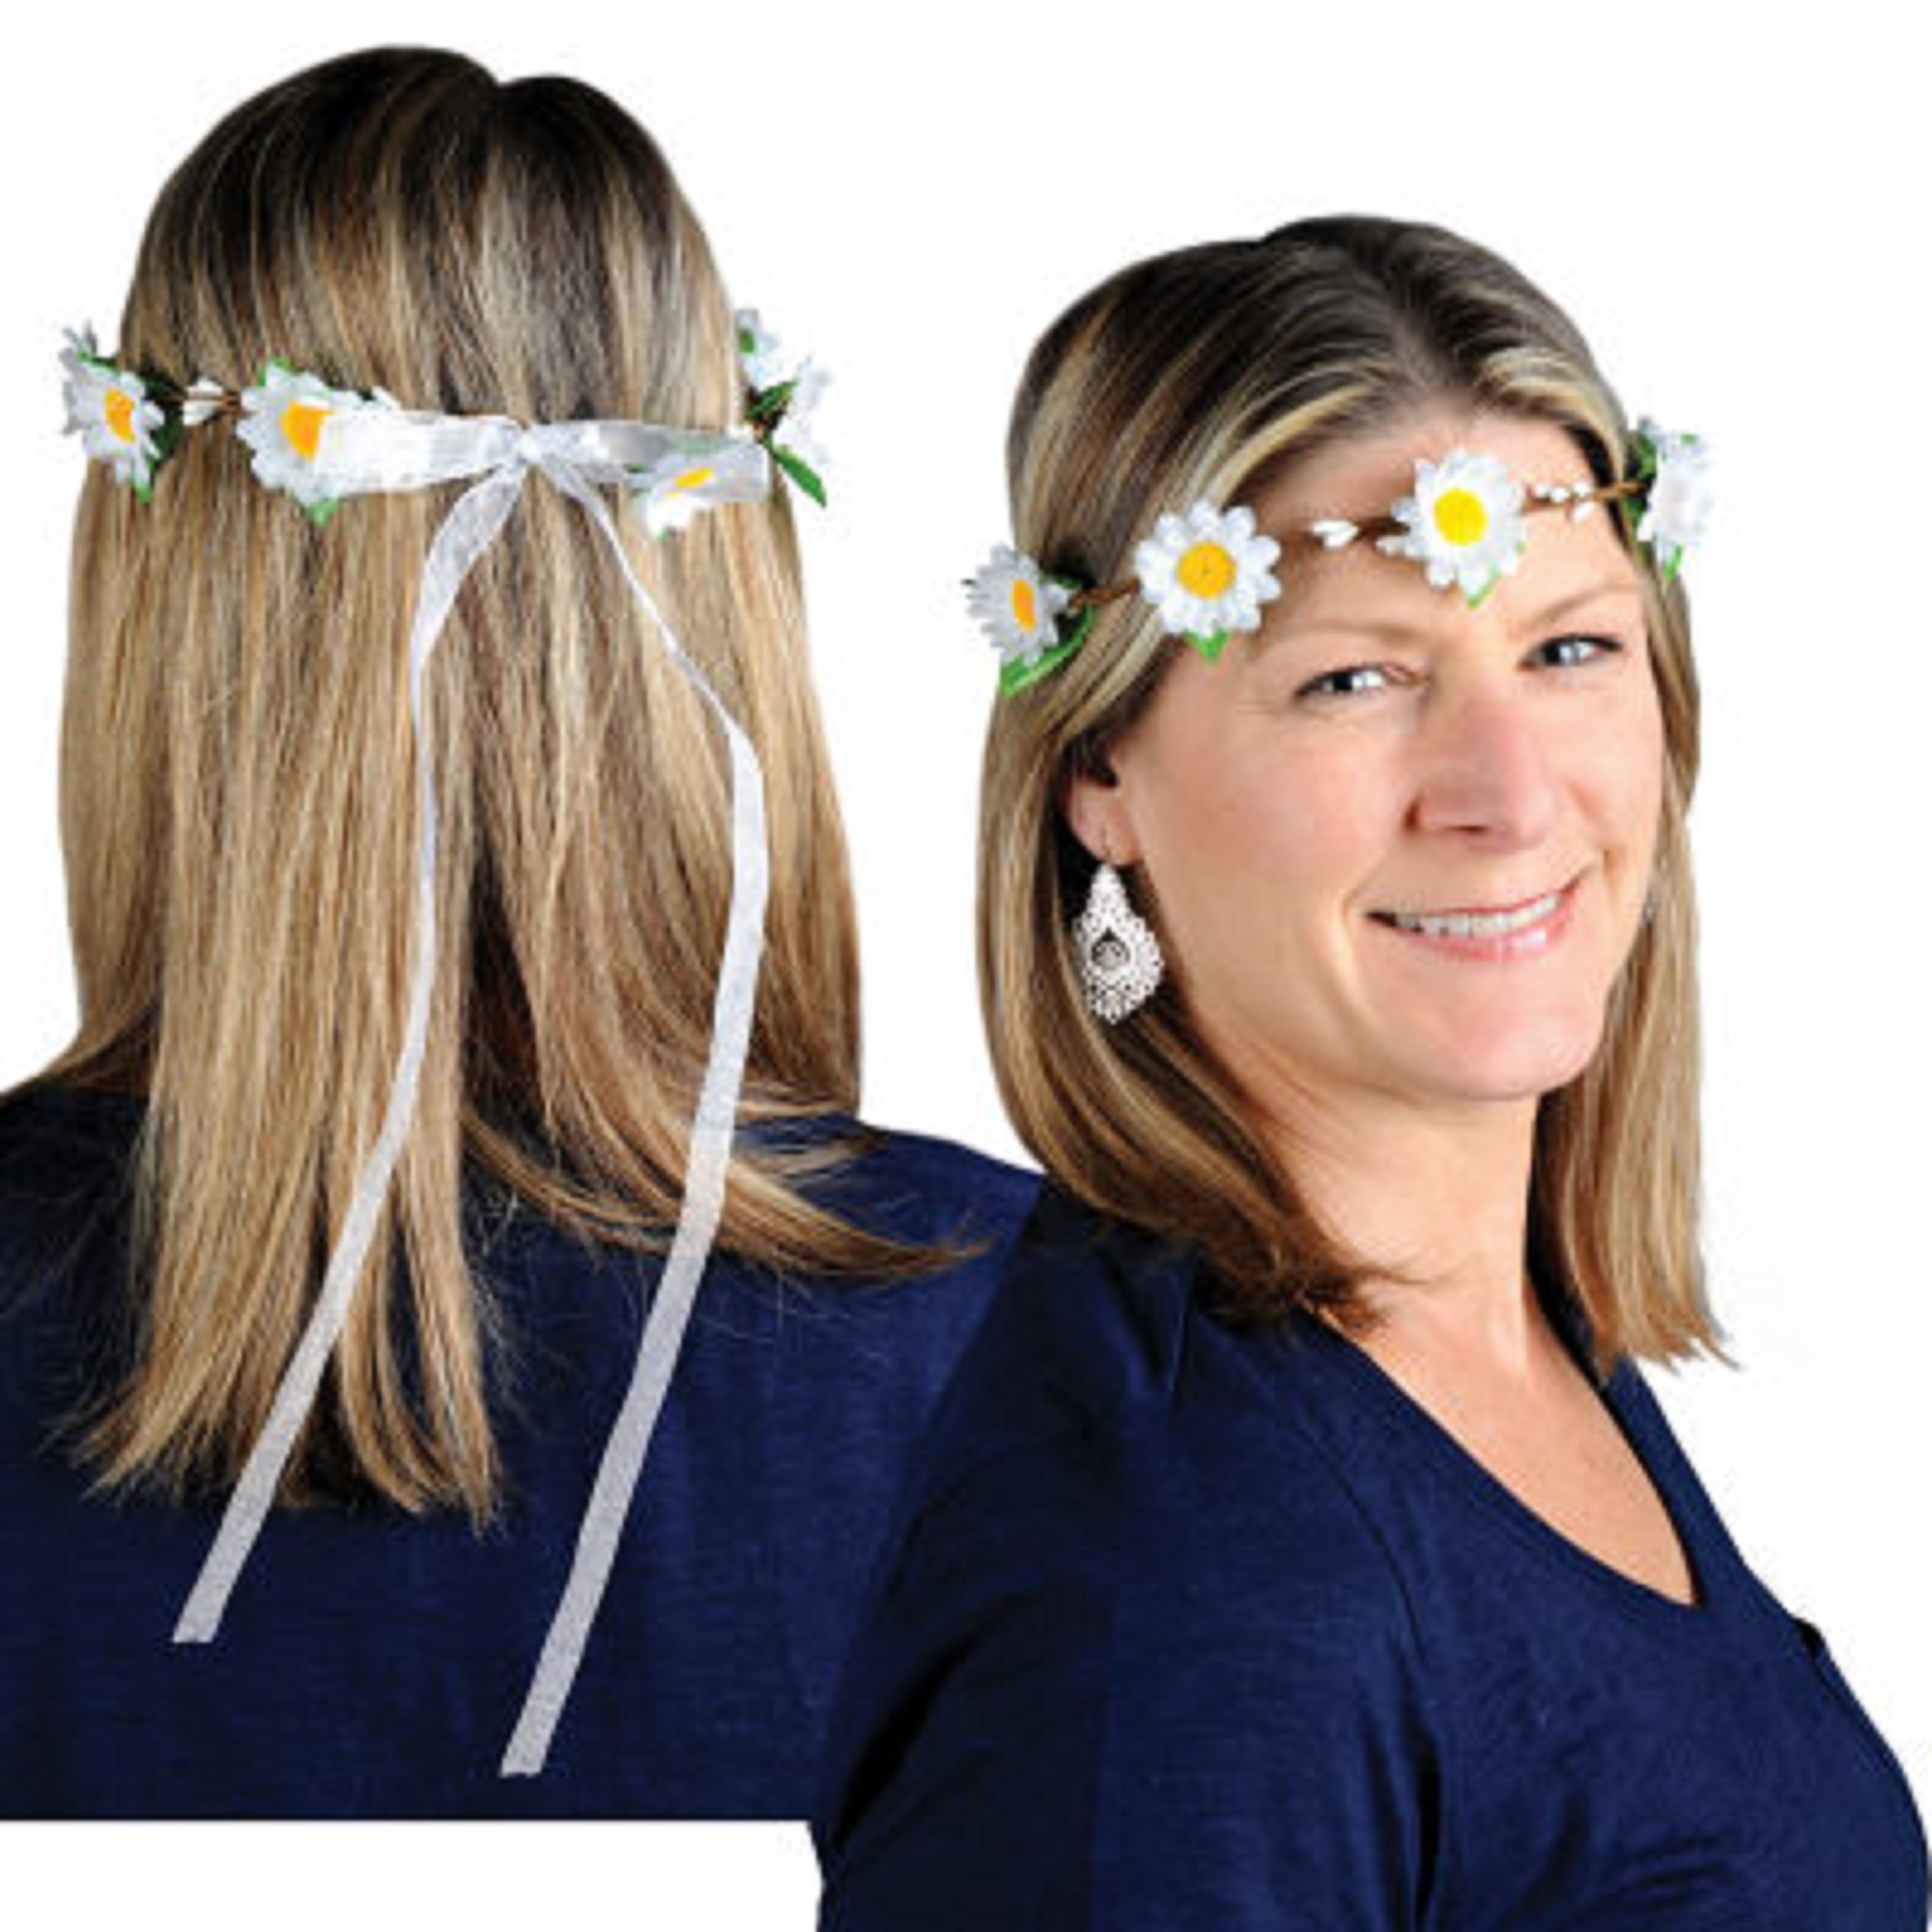 Party Central Club Pack of 12 White and Yellow Springtime Daisy Party Headbands Costume Accessories - One Size